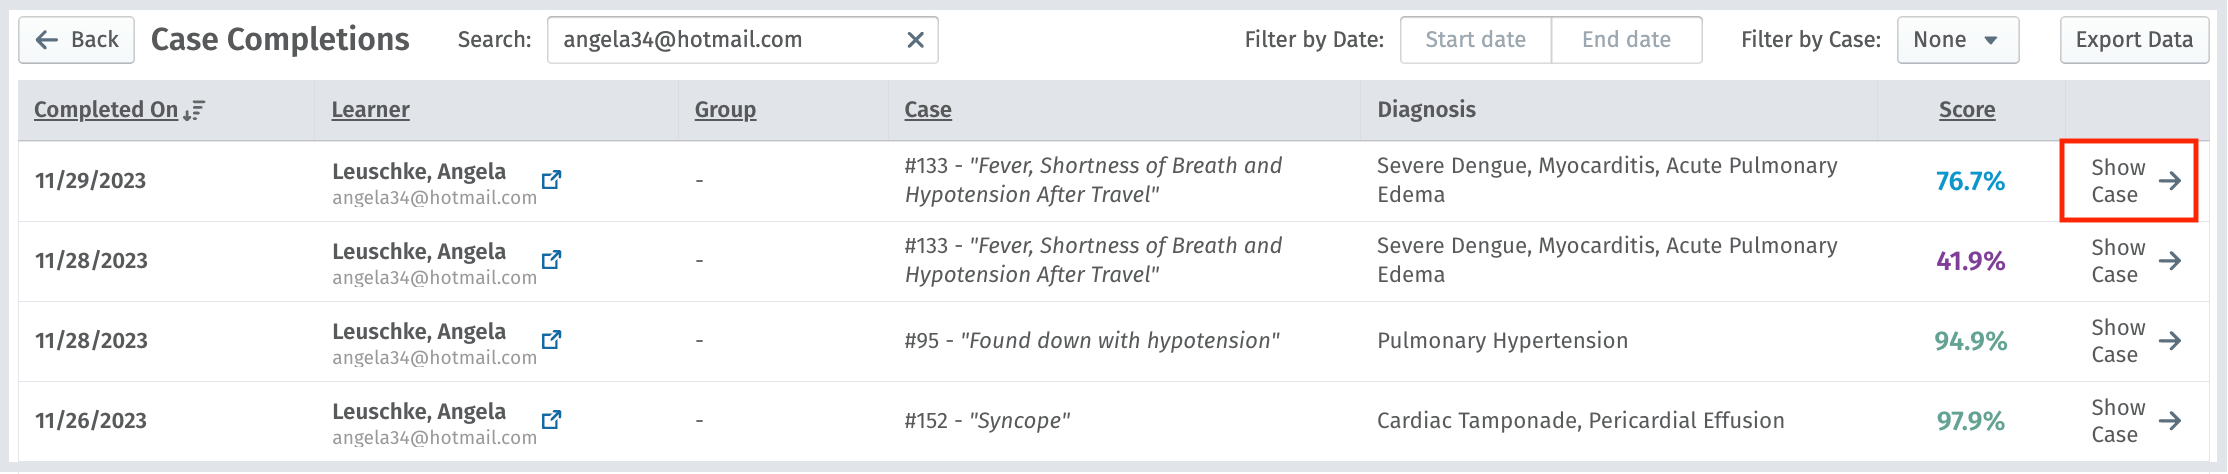 Case assignment results